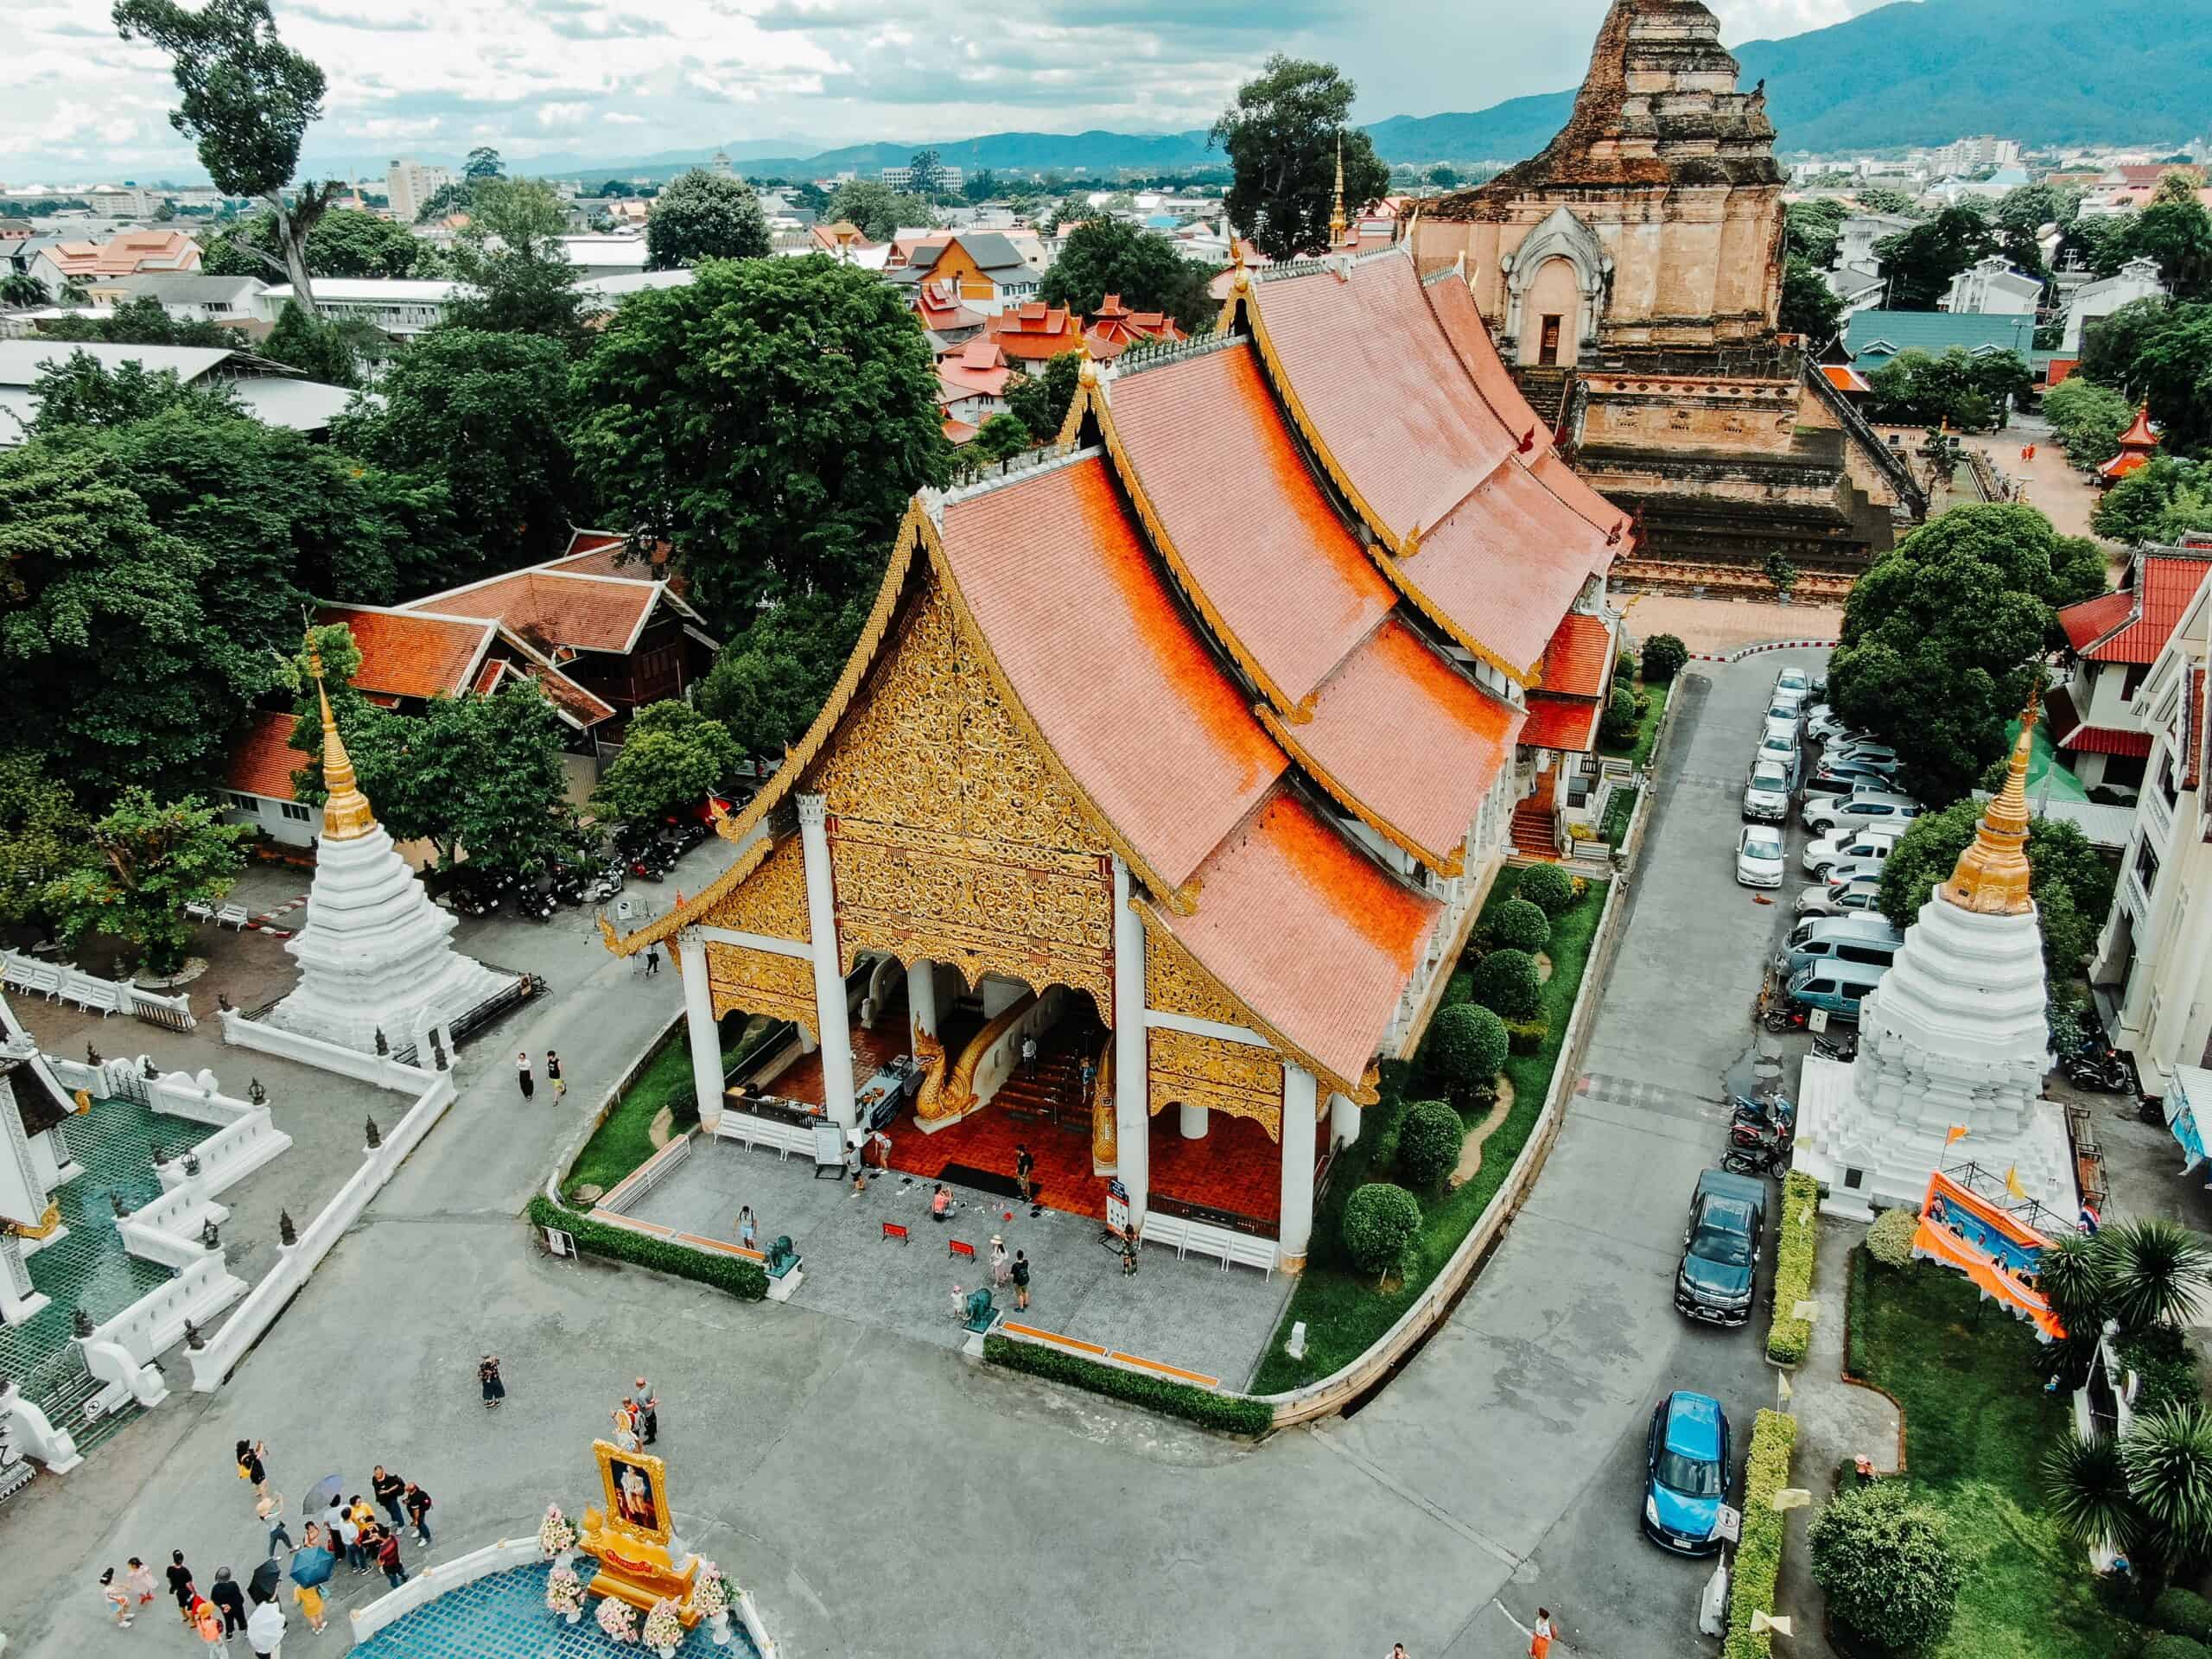 <p>Known for its temples, markets, and natural beauty, Chiang Mai provides retirees with a peaceful retreat in northern Thailand. Experience Thai traditions, explore the Old City, and enjoy the mountainous surroundings.</p>